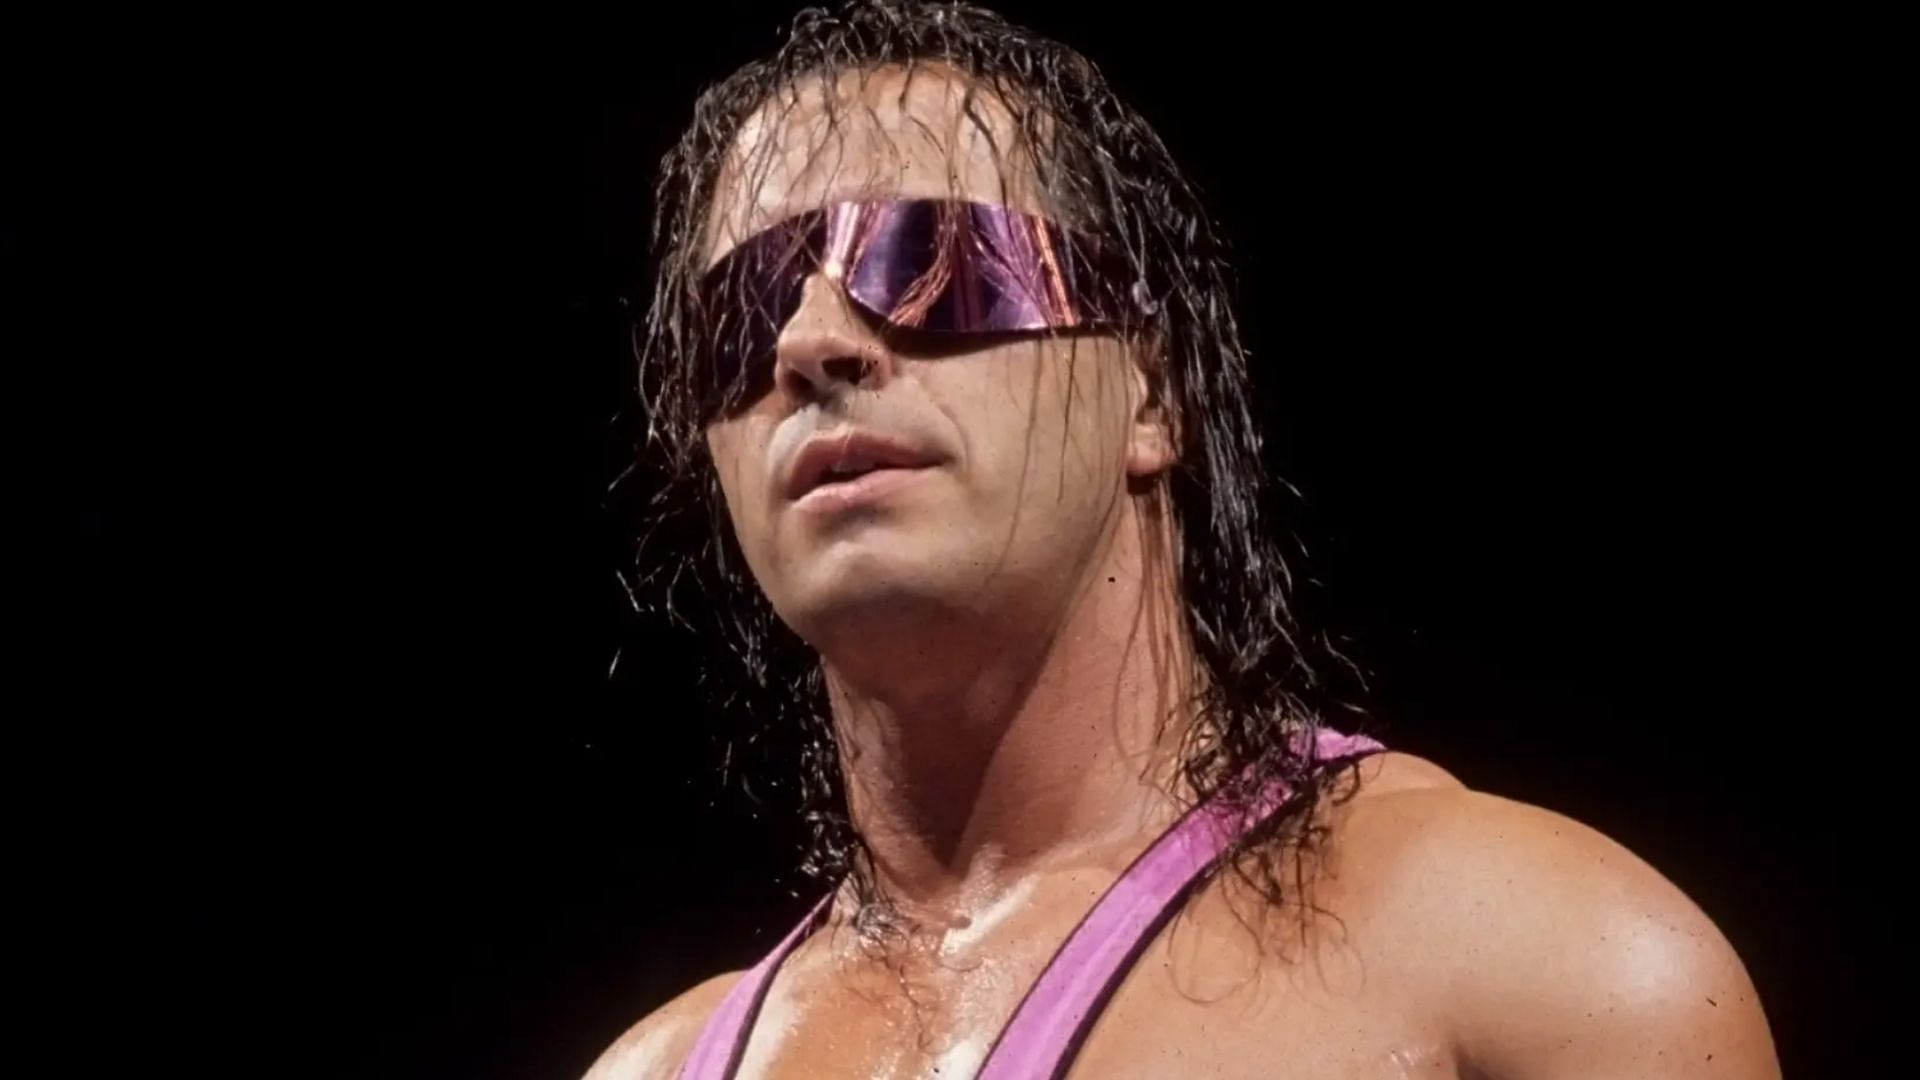 WWE Hall of Famer Bret Hart in the ring